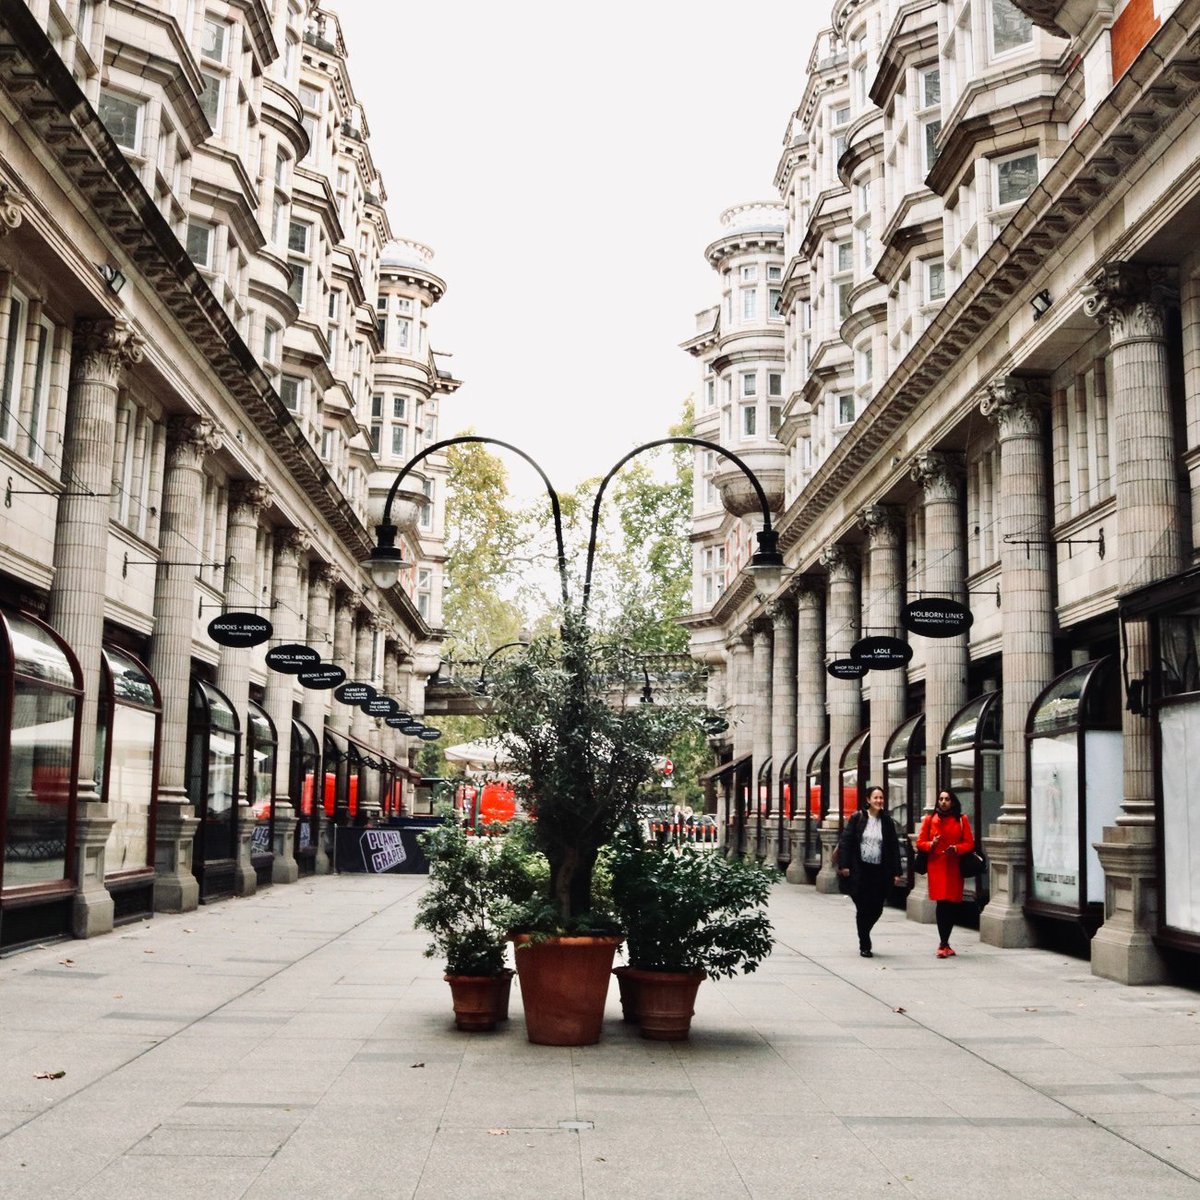 Discover authentic old-world Italian character in central London - take a stroll to Sicilian Avenue, a delightful pedestrian shopping parade located in nearby Bloomsbury. Prego!